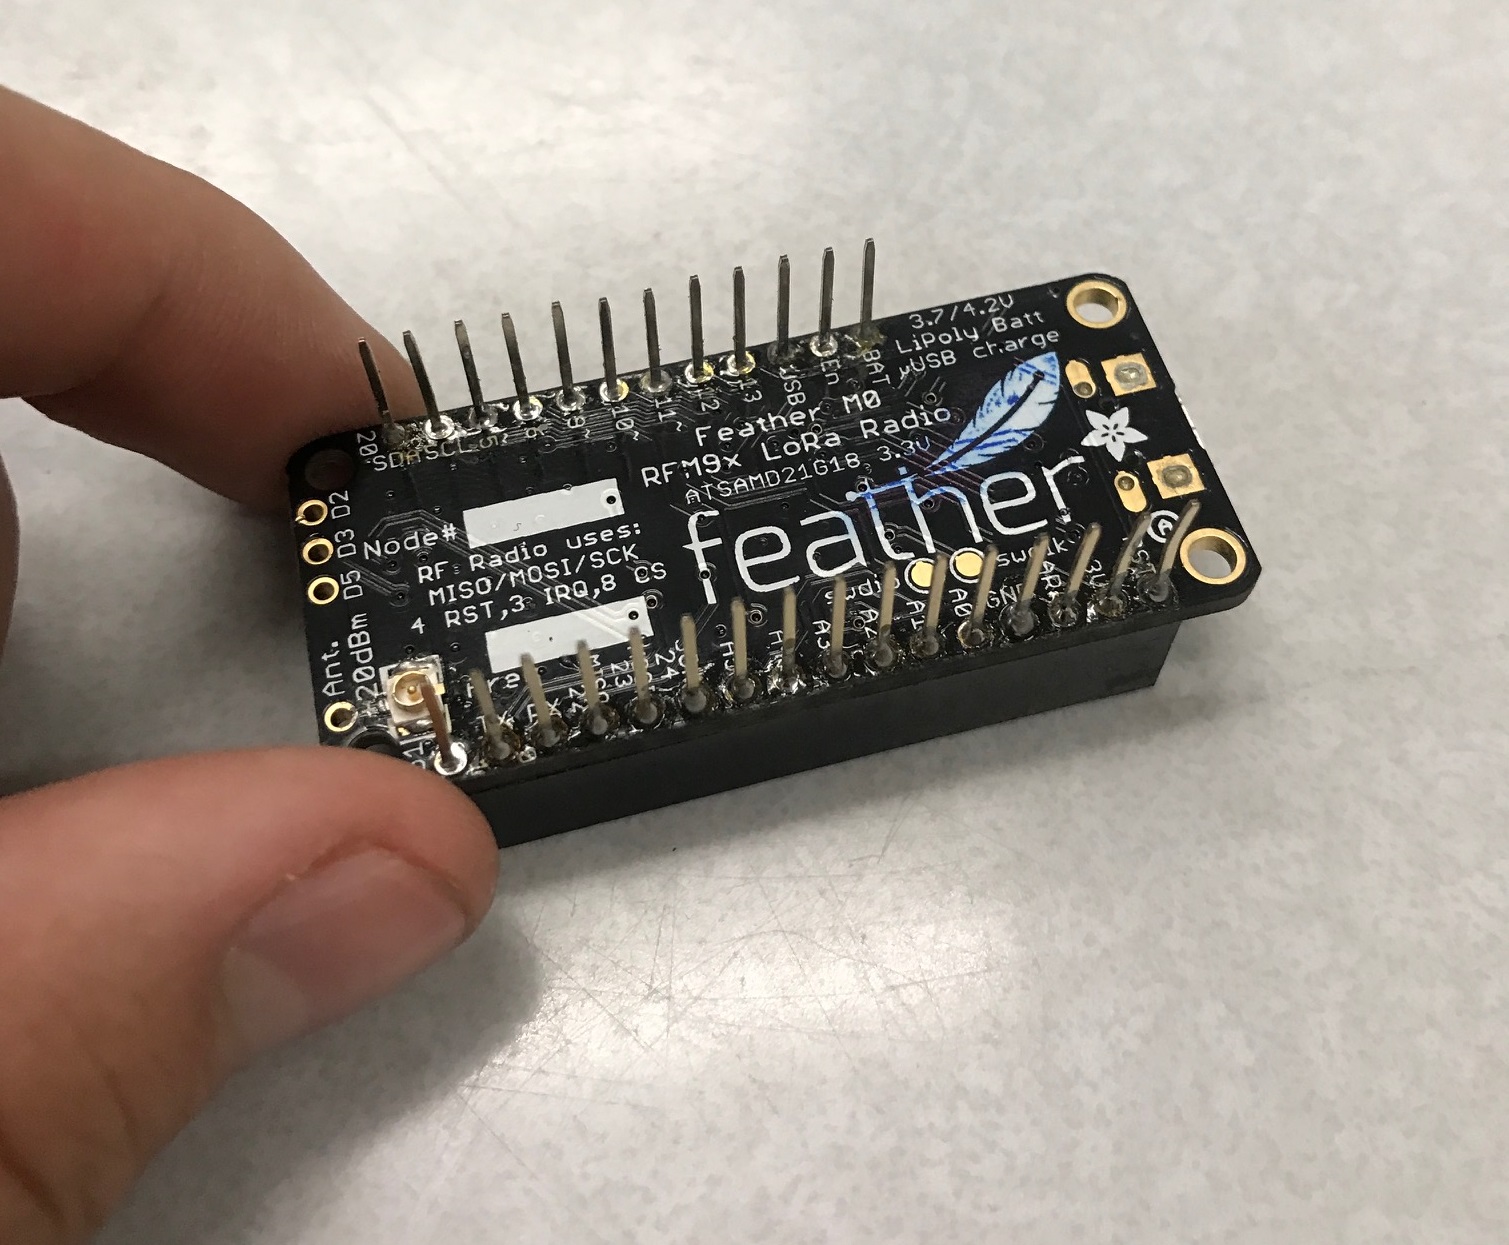 Picture of the Feather M0 with LoRa Radio with the pins correctly soldered on.